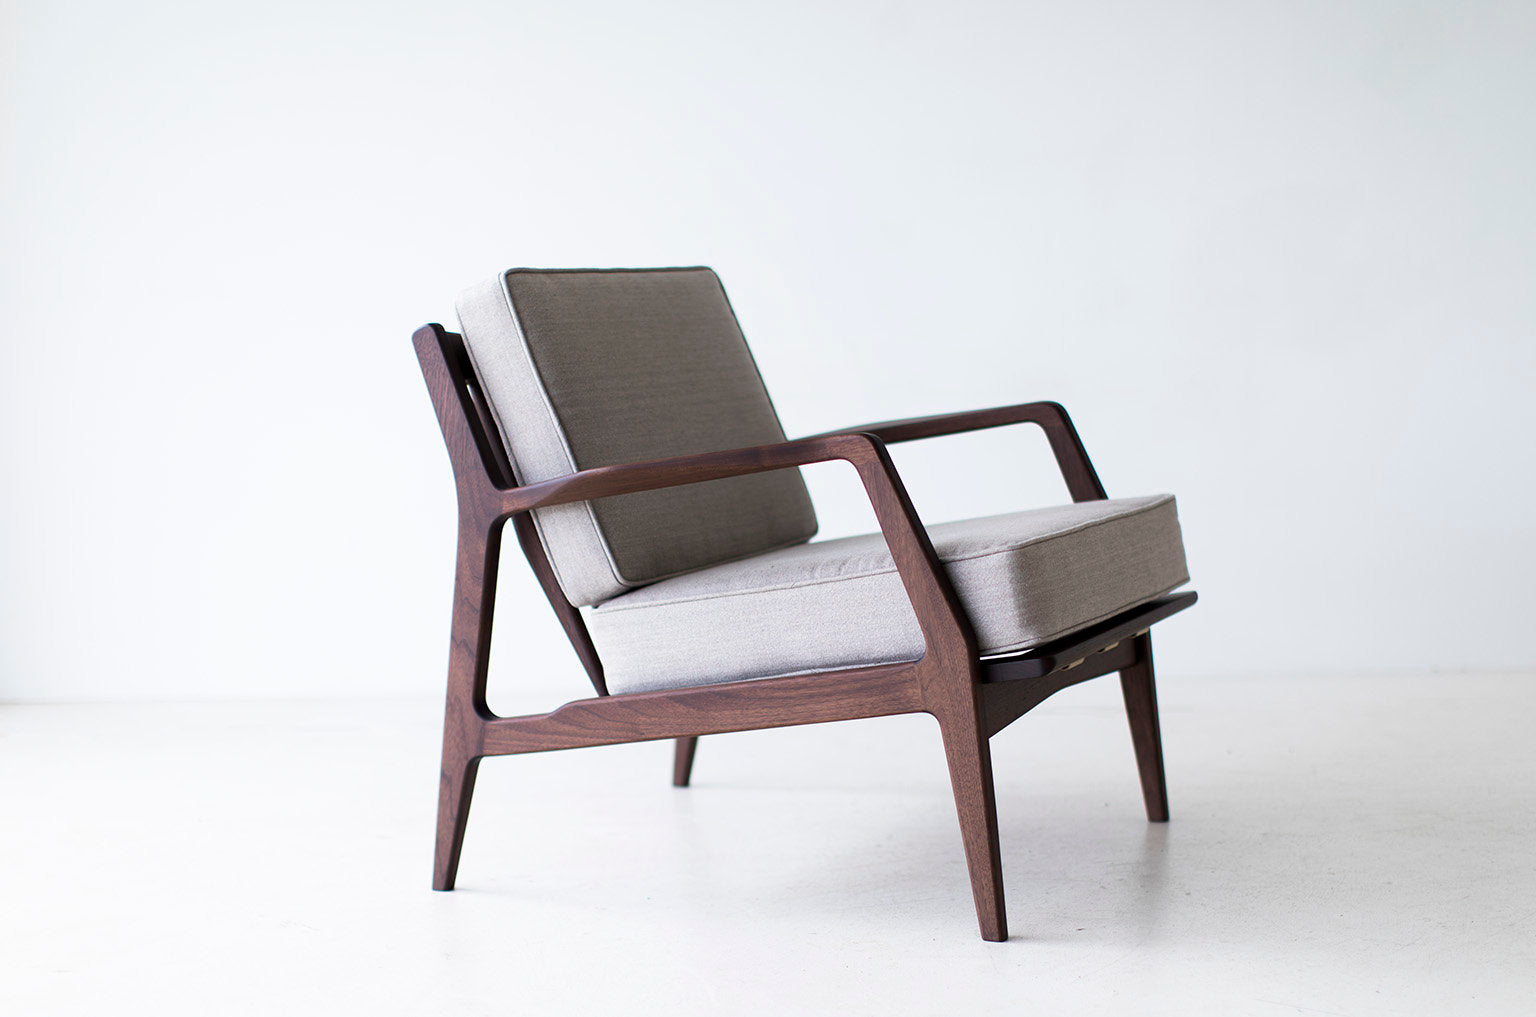 lawrence-peabody-lounge-chair-selig-08